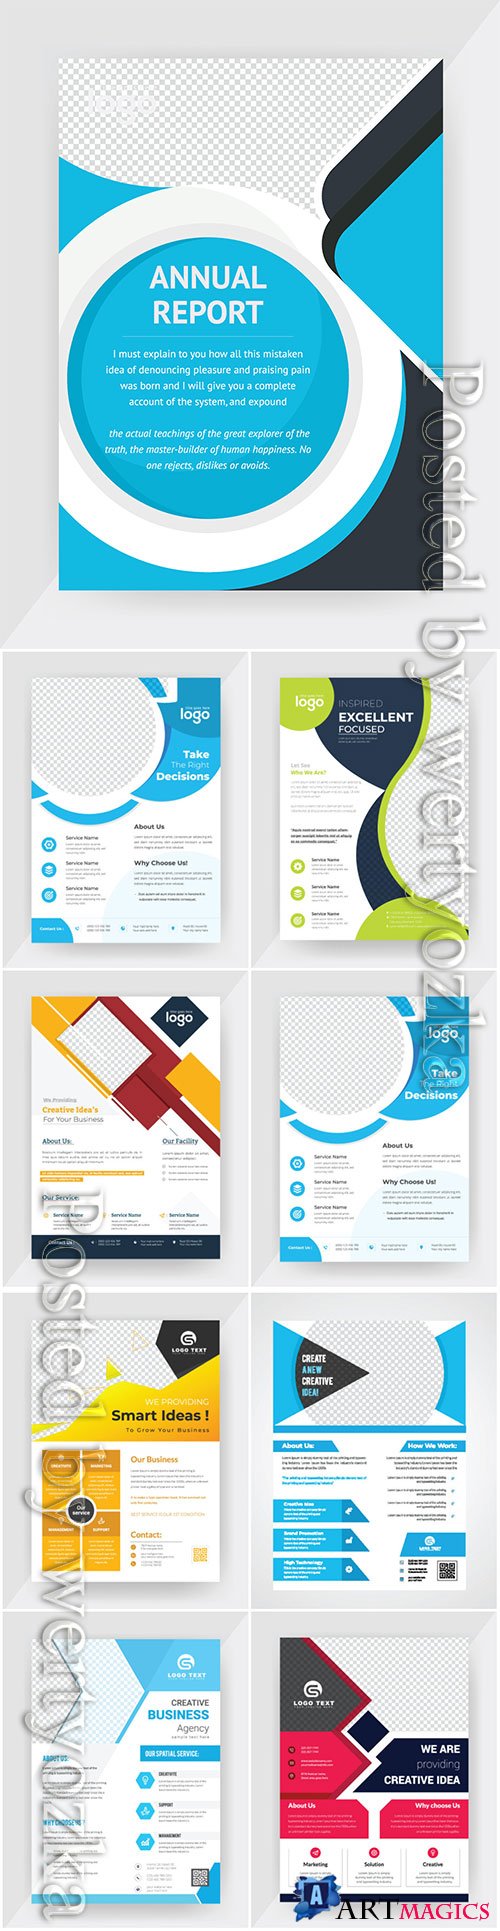 Annual report concept flyer vector template